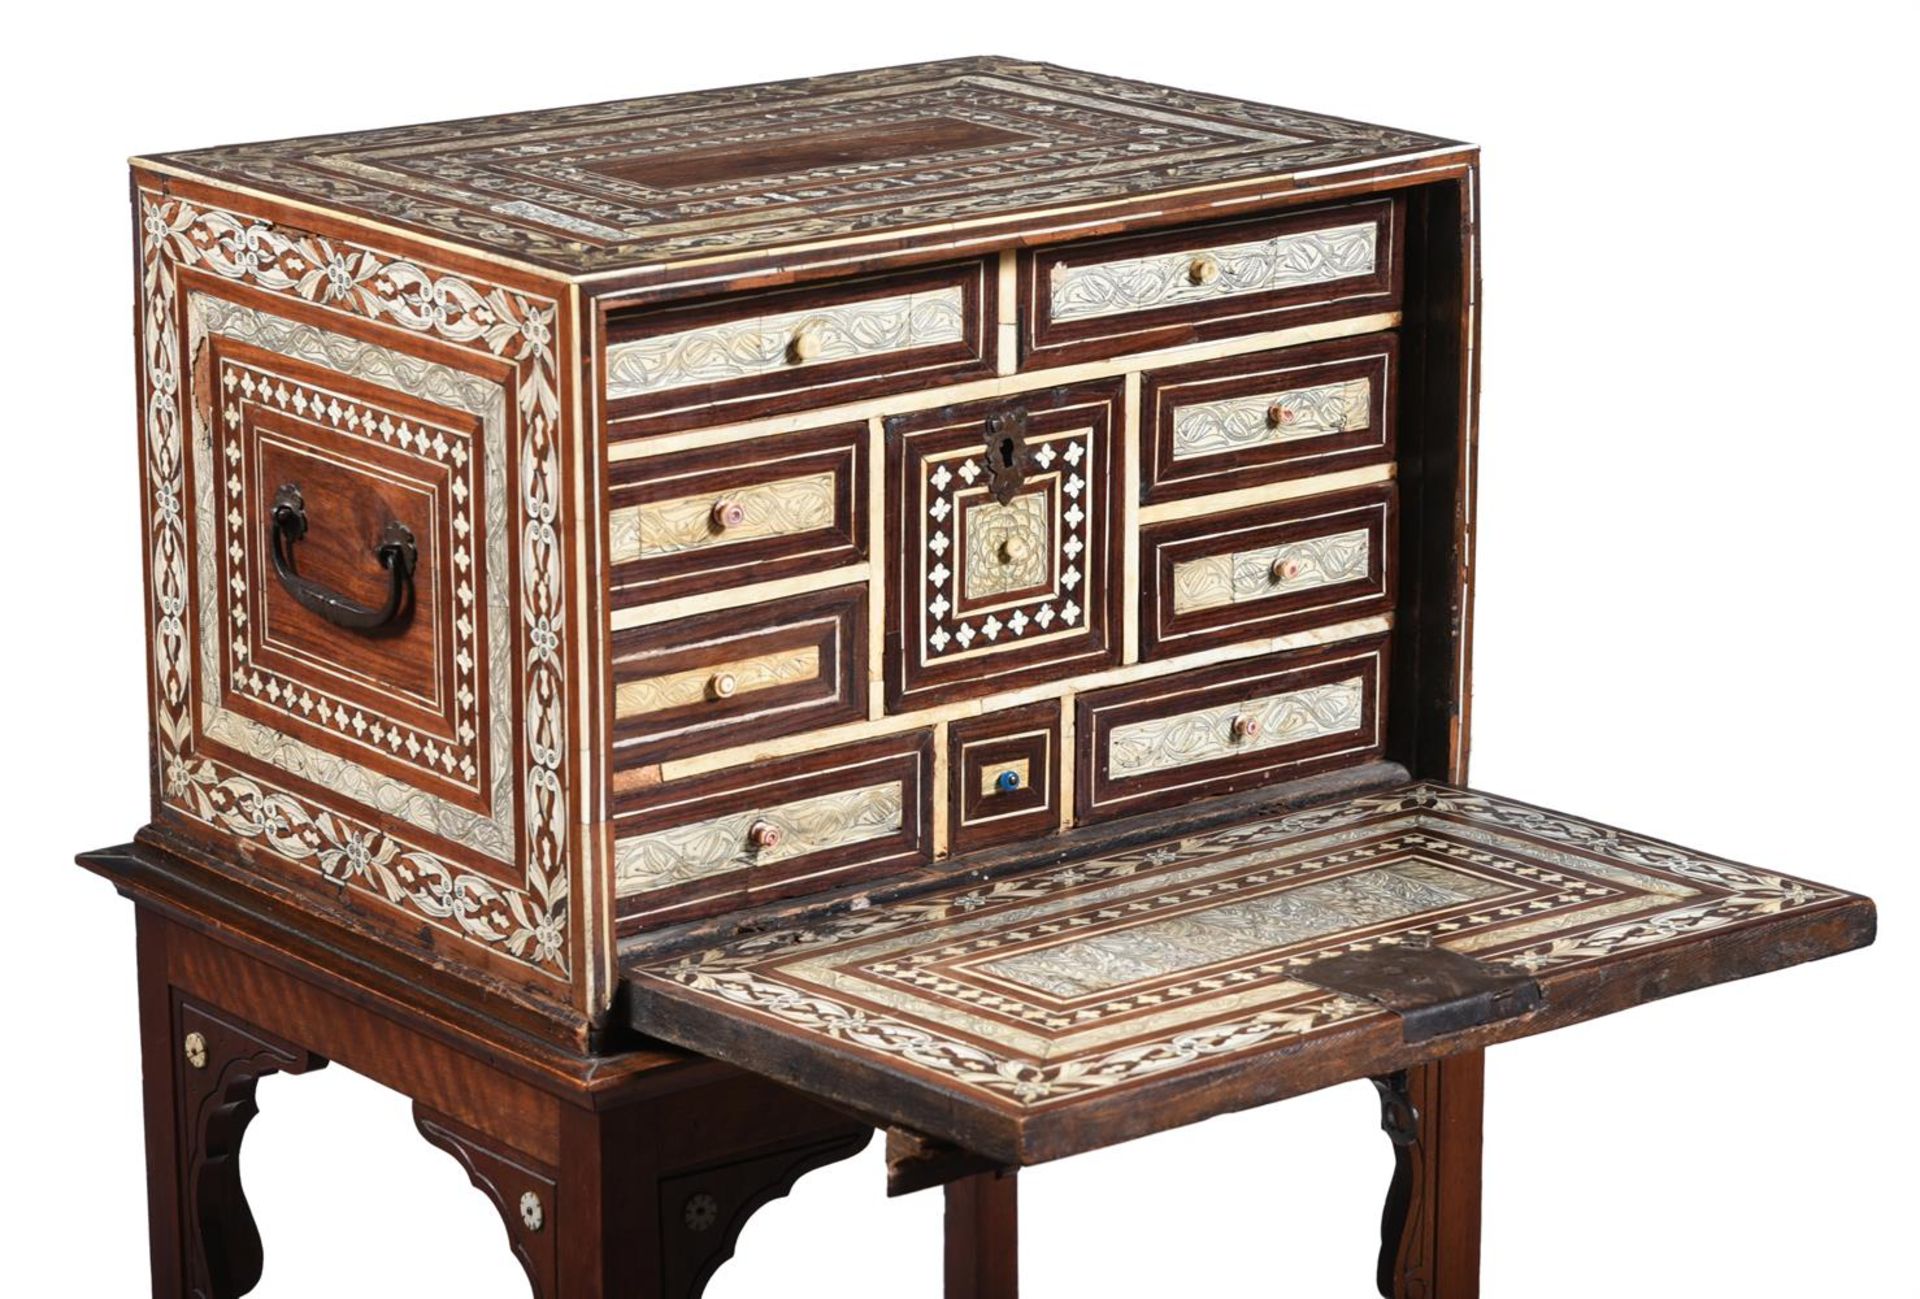 Y AN INDO-PORTUGUESE ROSEWOOD AND IVORY INLAID CABINET ON STAND, THE CABINET 17TH CENTURY - Bild 3 aus 3